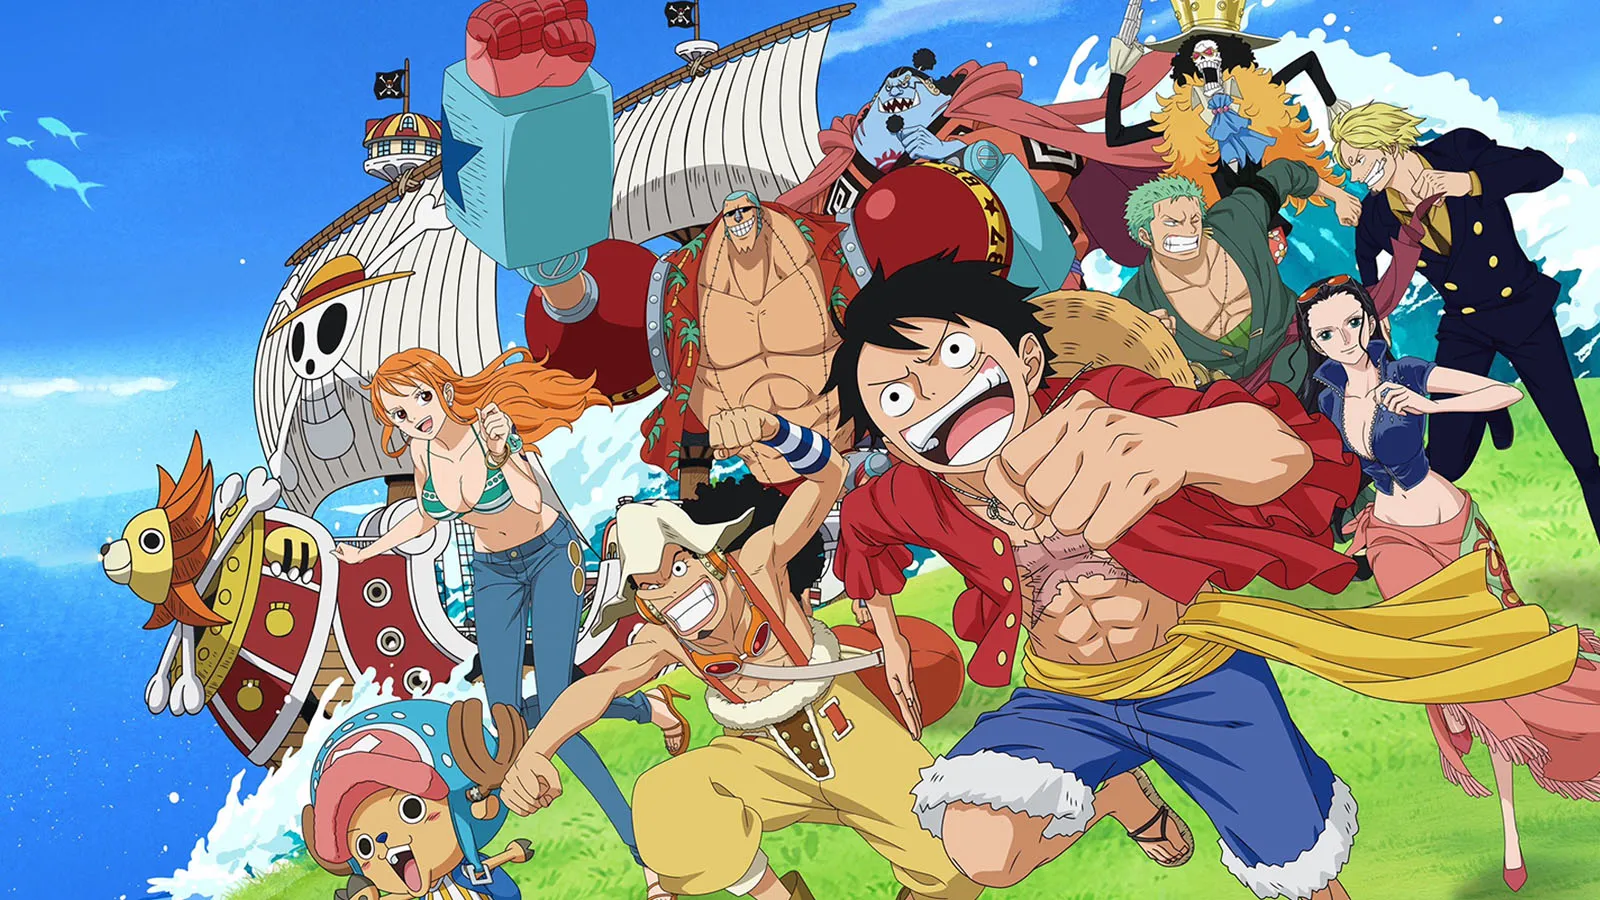 Pin by Drago on Saved images  Manga anime one piece, Character art,  Fighting drawing